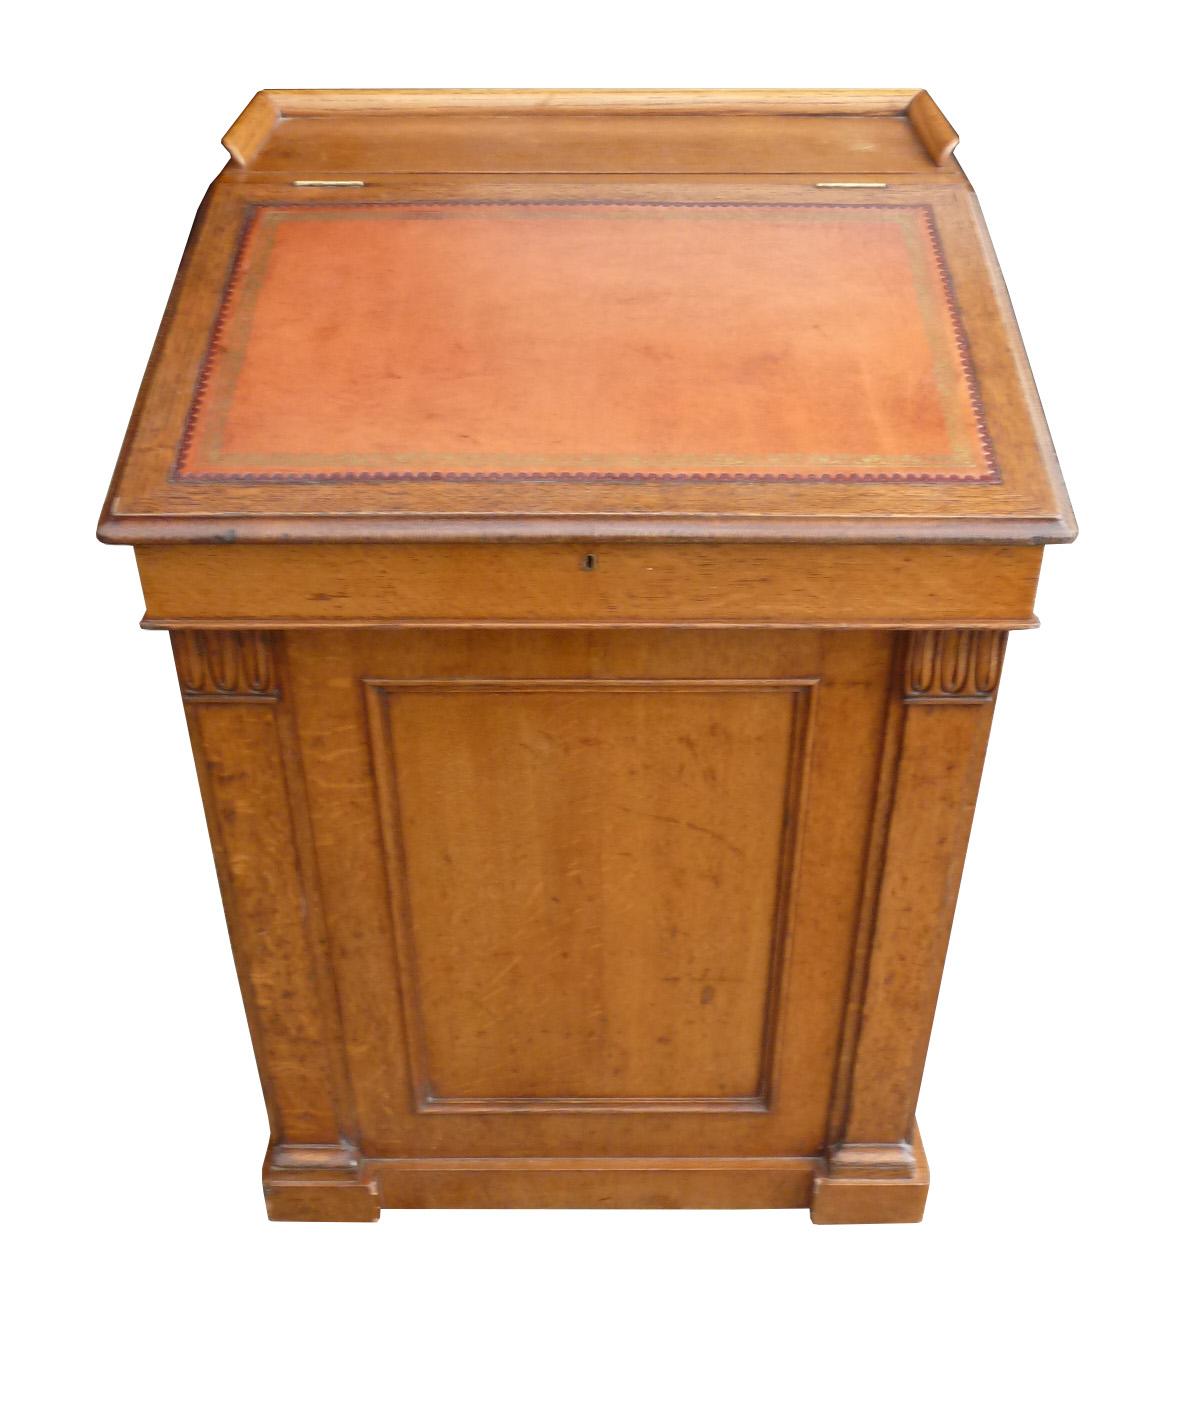 For sale is a good quality William IV oak sliding top davenport. The top of the davenport has a lid that lifts to reveal a fitted interior including ample storage space for stationary etc. It also has a rising fall which reveals further storage